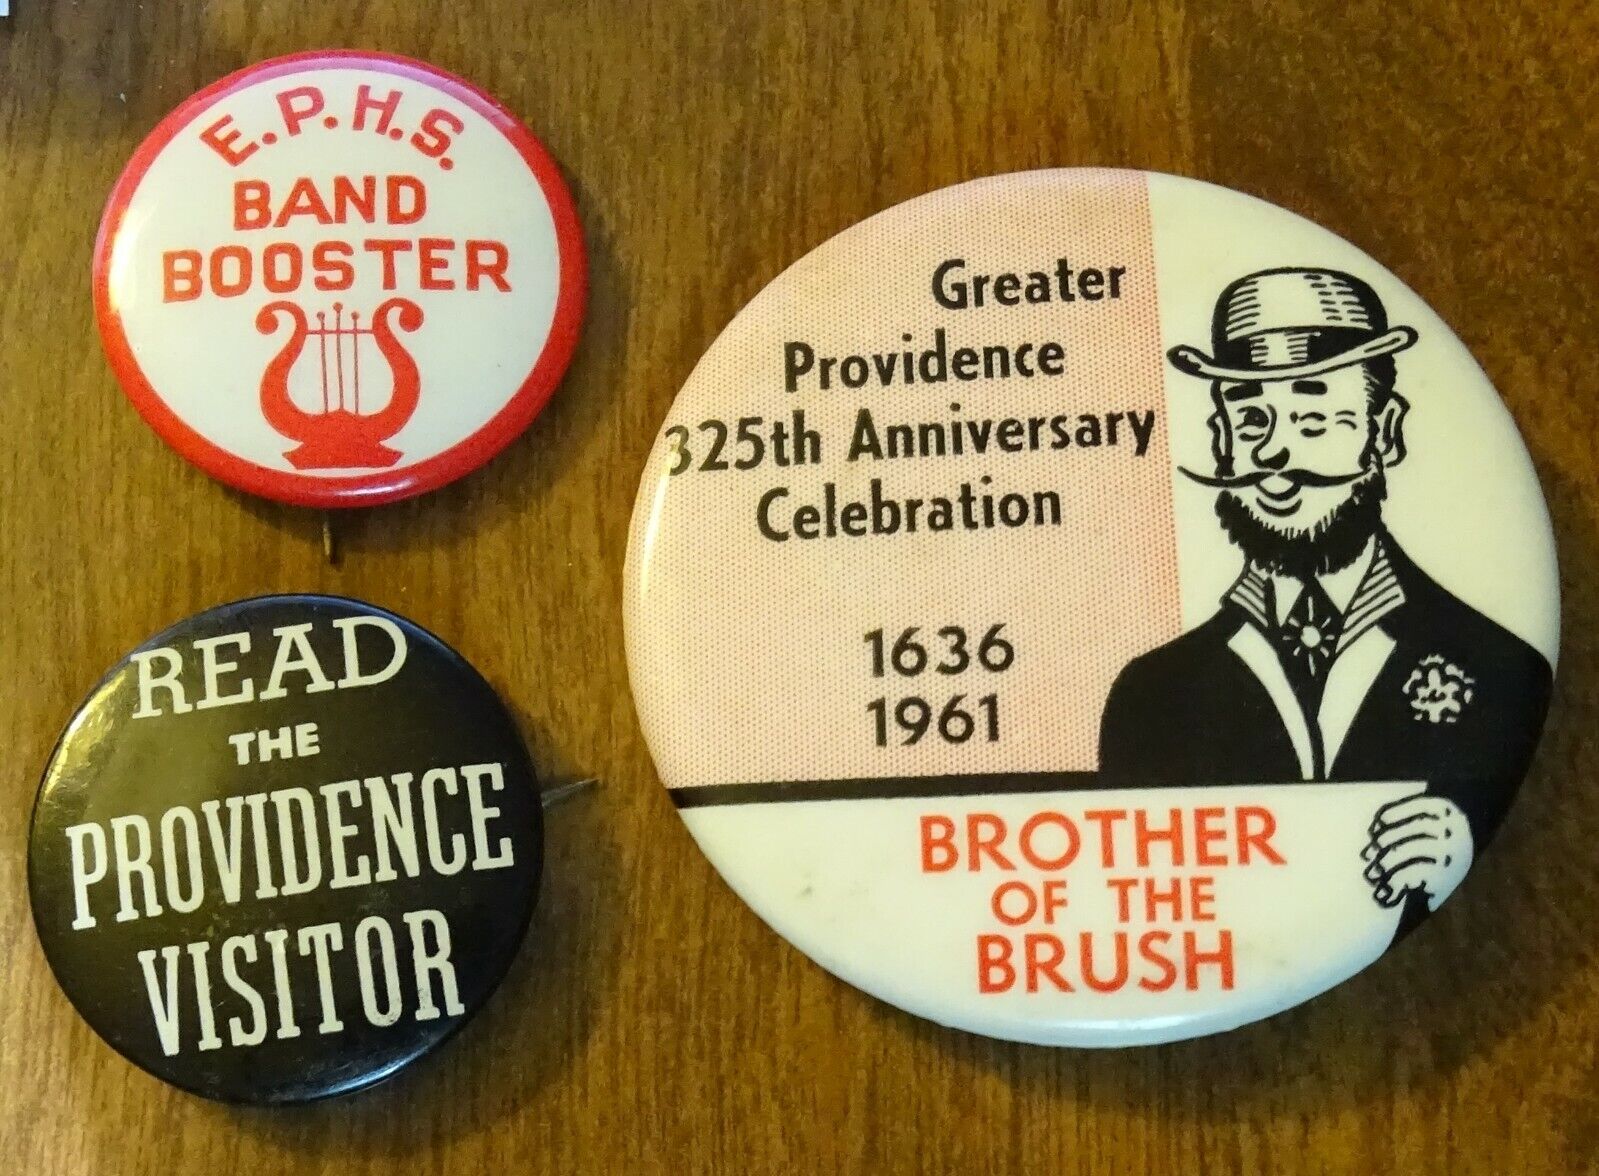 3 old Providence buttons 325th Anniv, E.P.H.S. Band, Read the Prov. Visitor